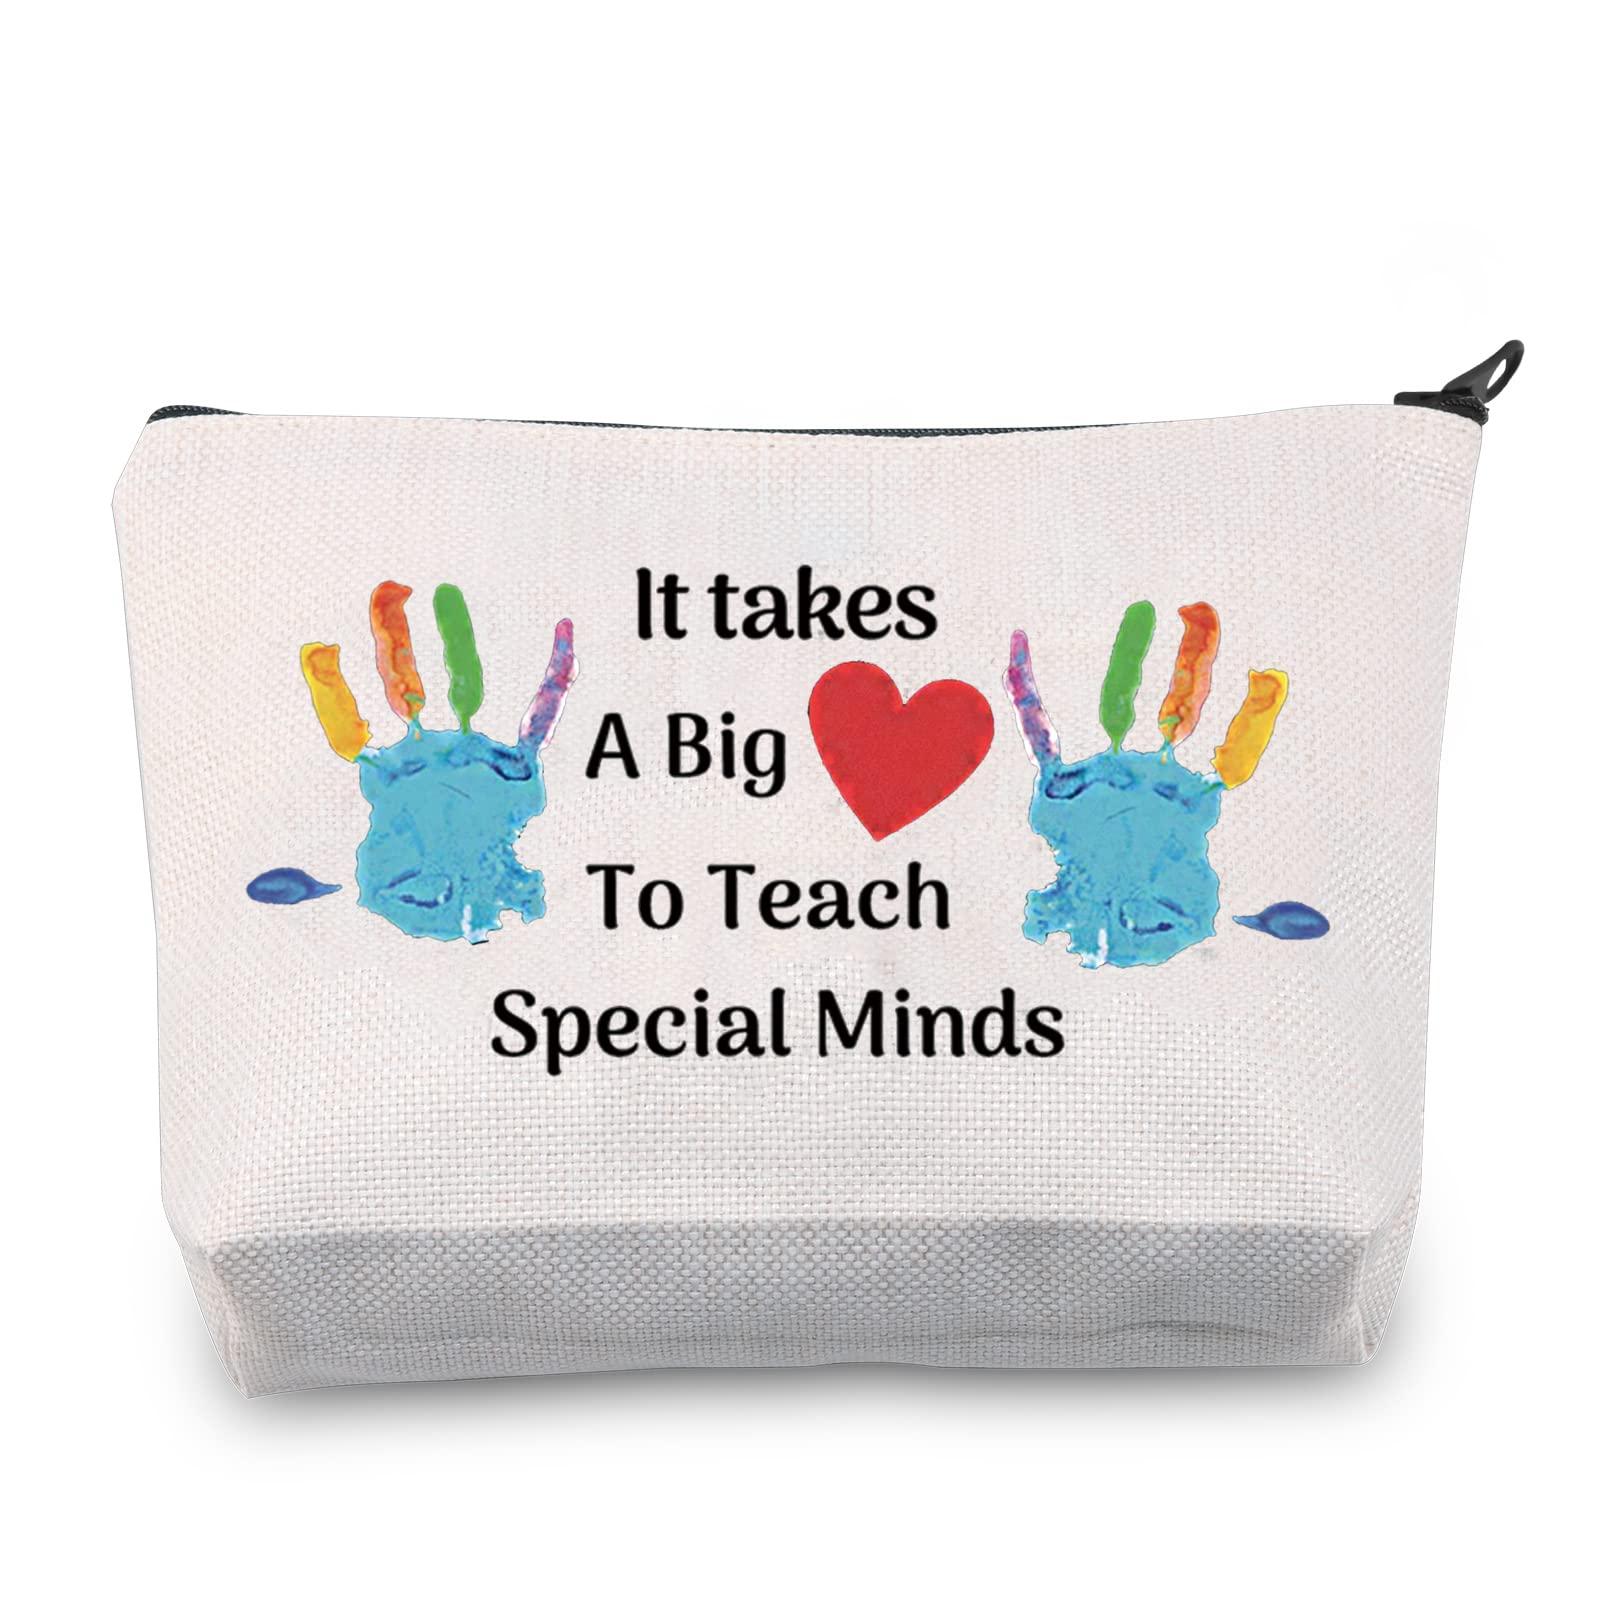 LEVLO Teachers Appreciation Gifts It Takes A Big Heart to Teach Special Minds Cosmetic Bag Teacher’s Day (to Teach Special Minds)